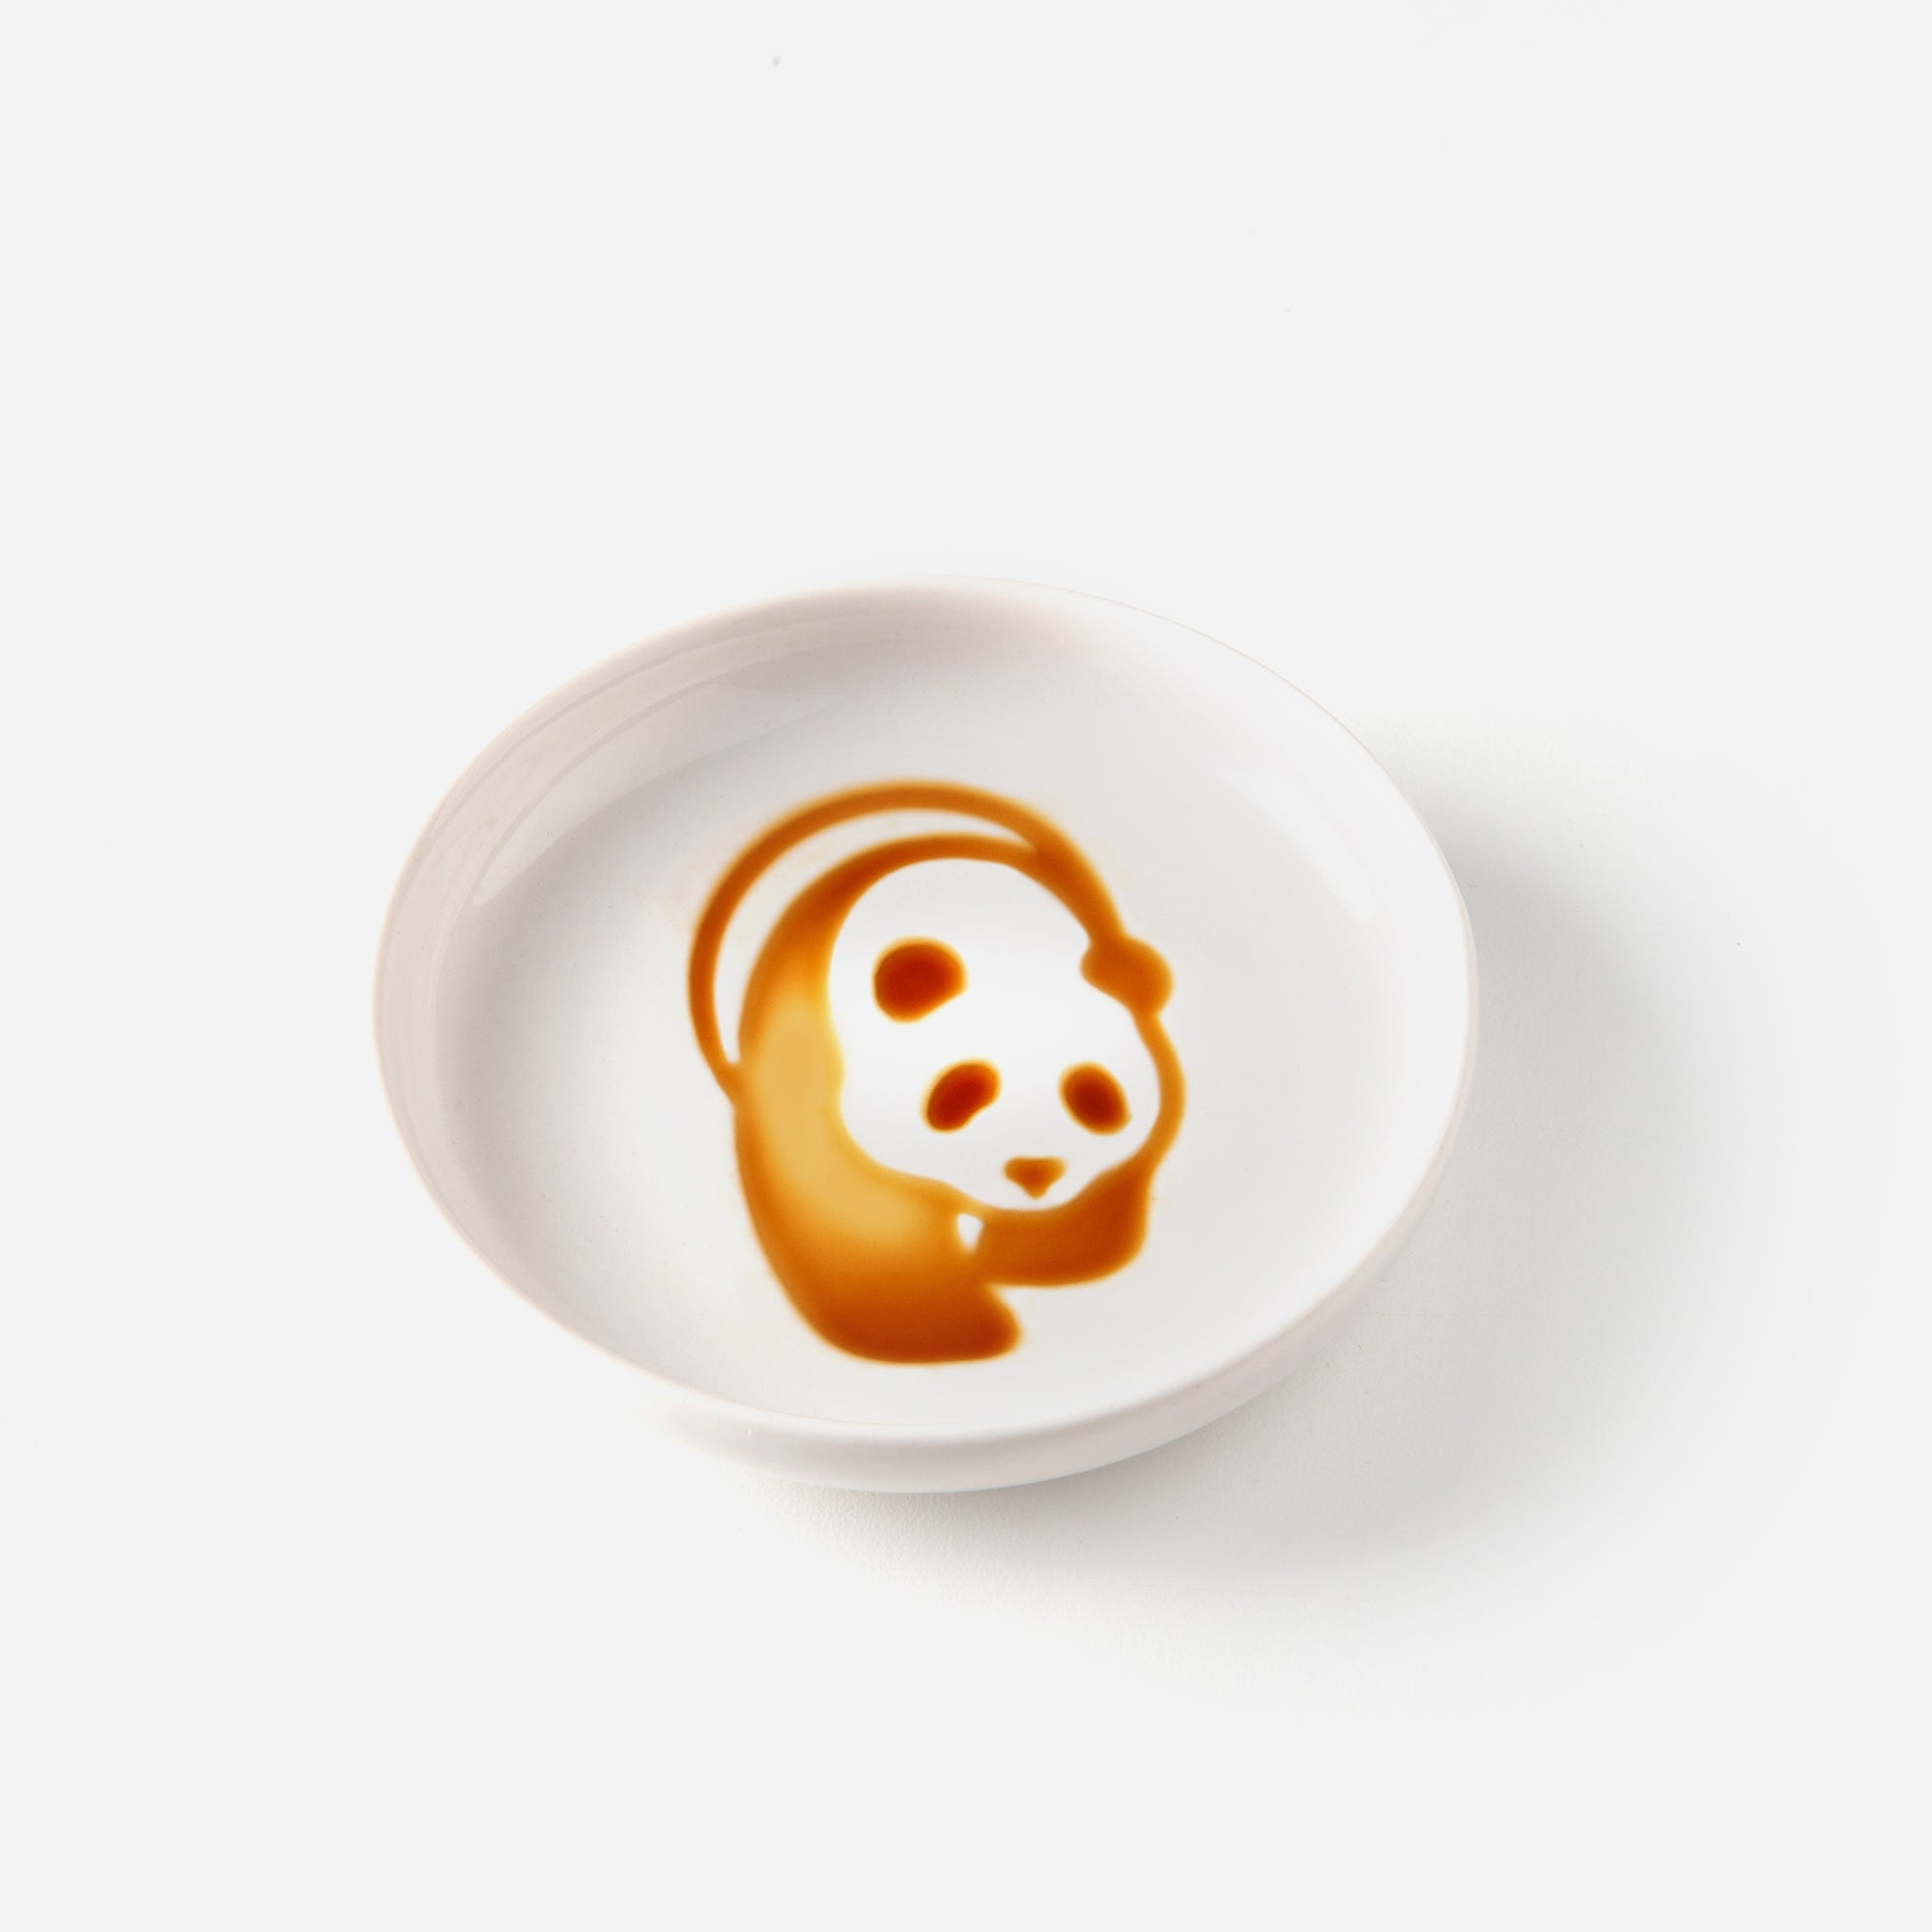 Panda Soy Sauce Dishes